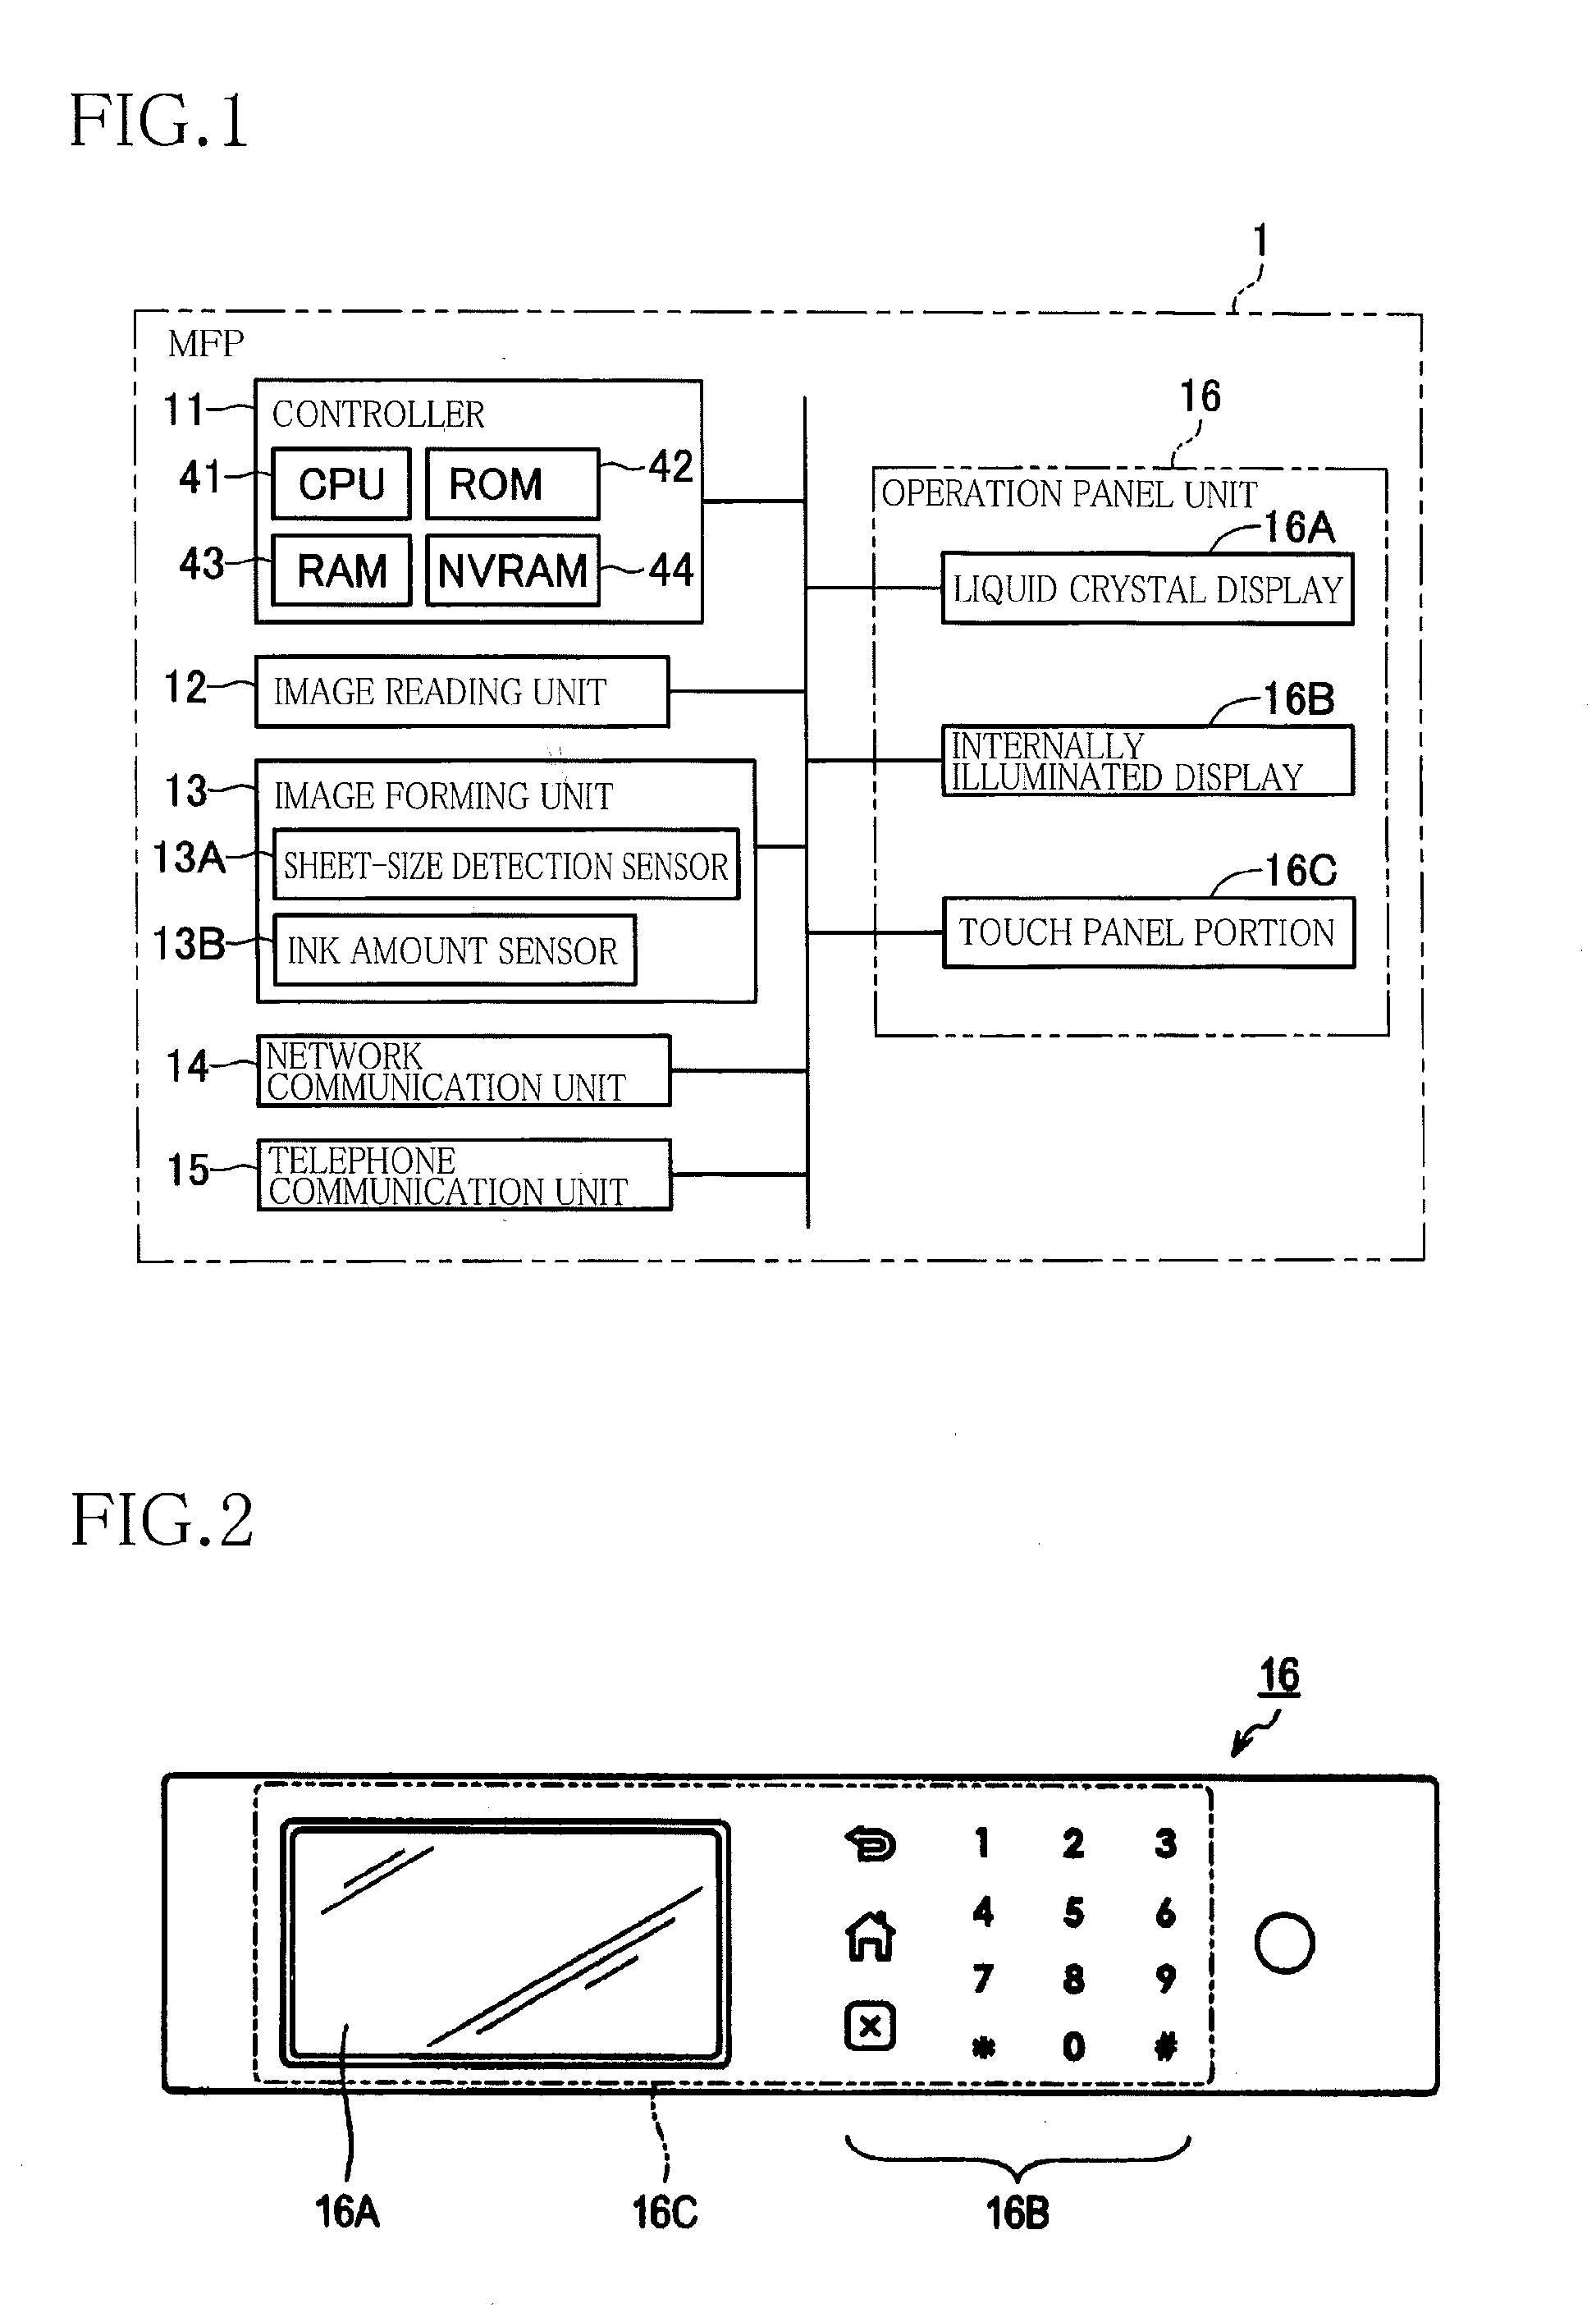 Image processing apparatus and non-transitory storage medium storing program to be executed by the same